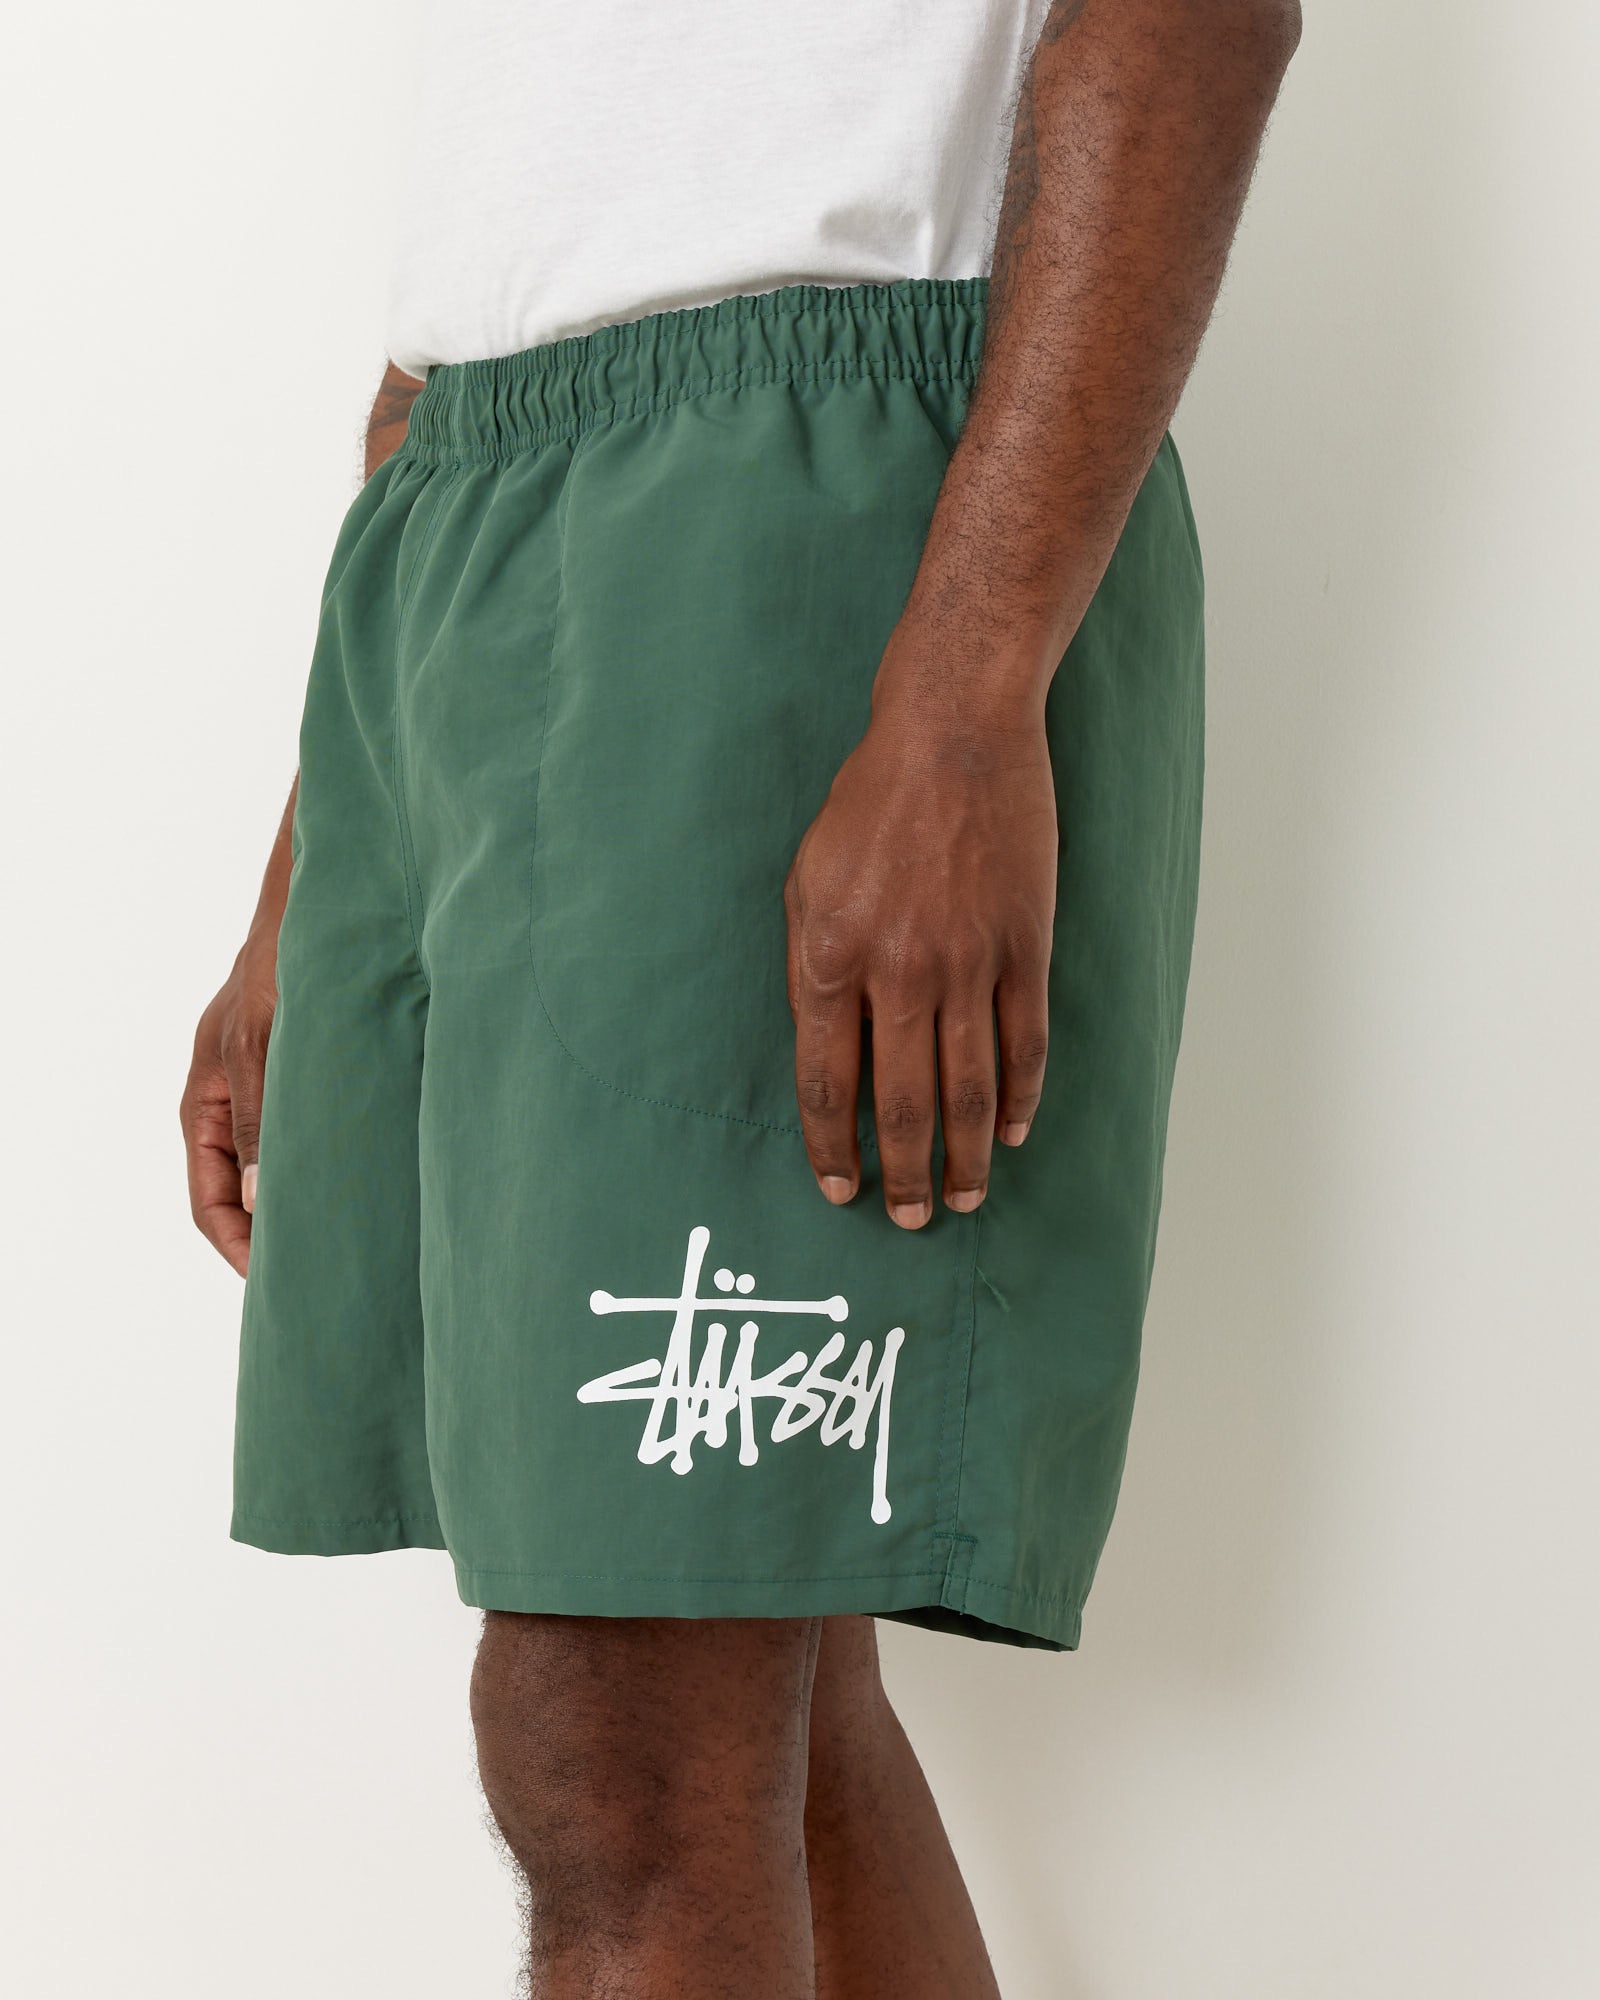 Water Shorts in Emerald